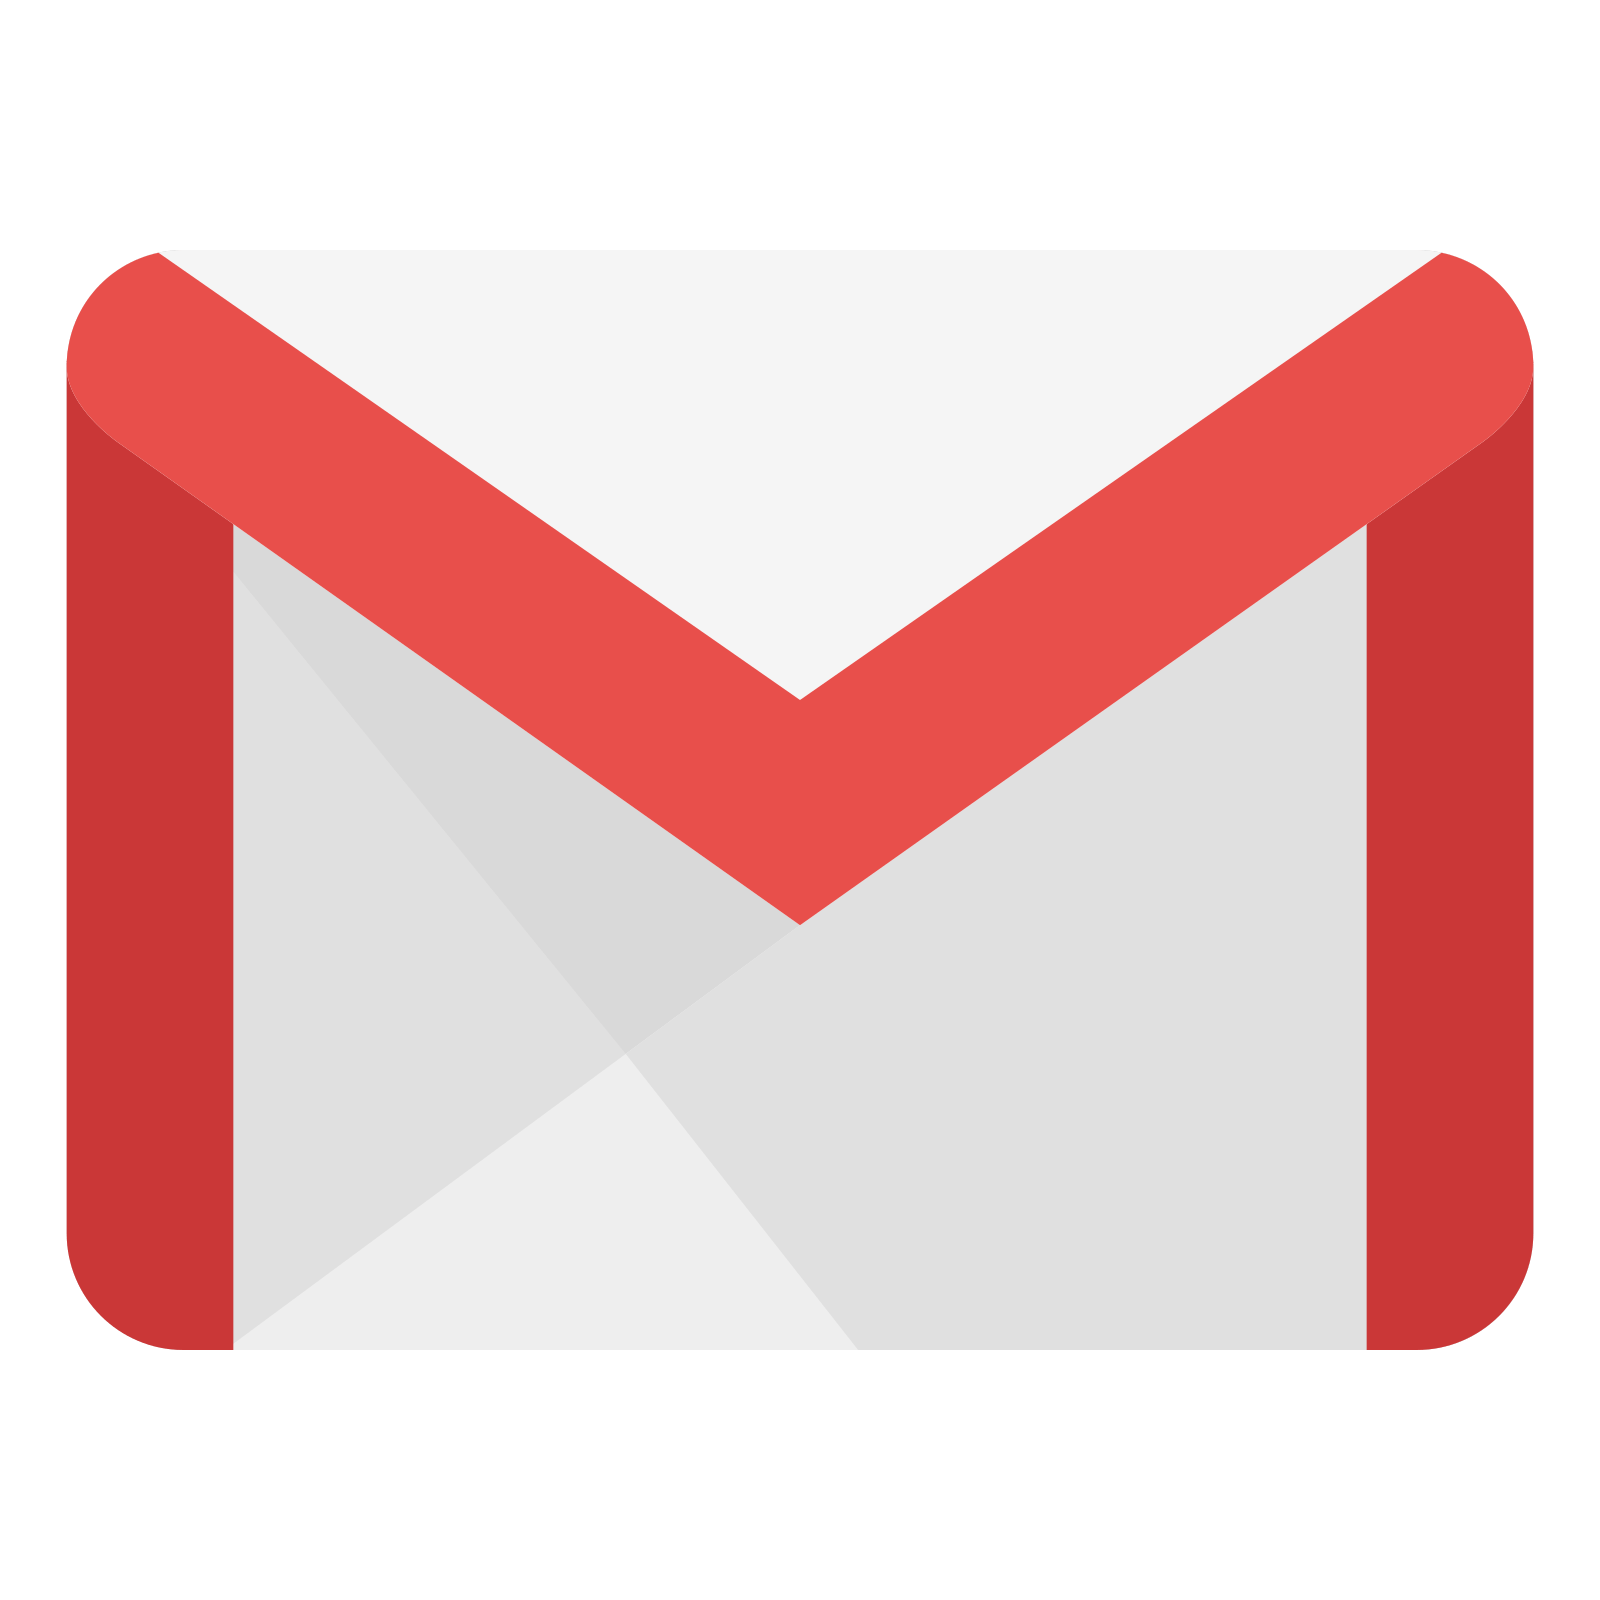 logo gmail png gmail icon download png and vector #9952